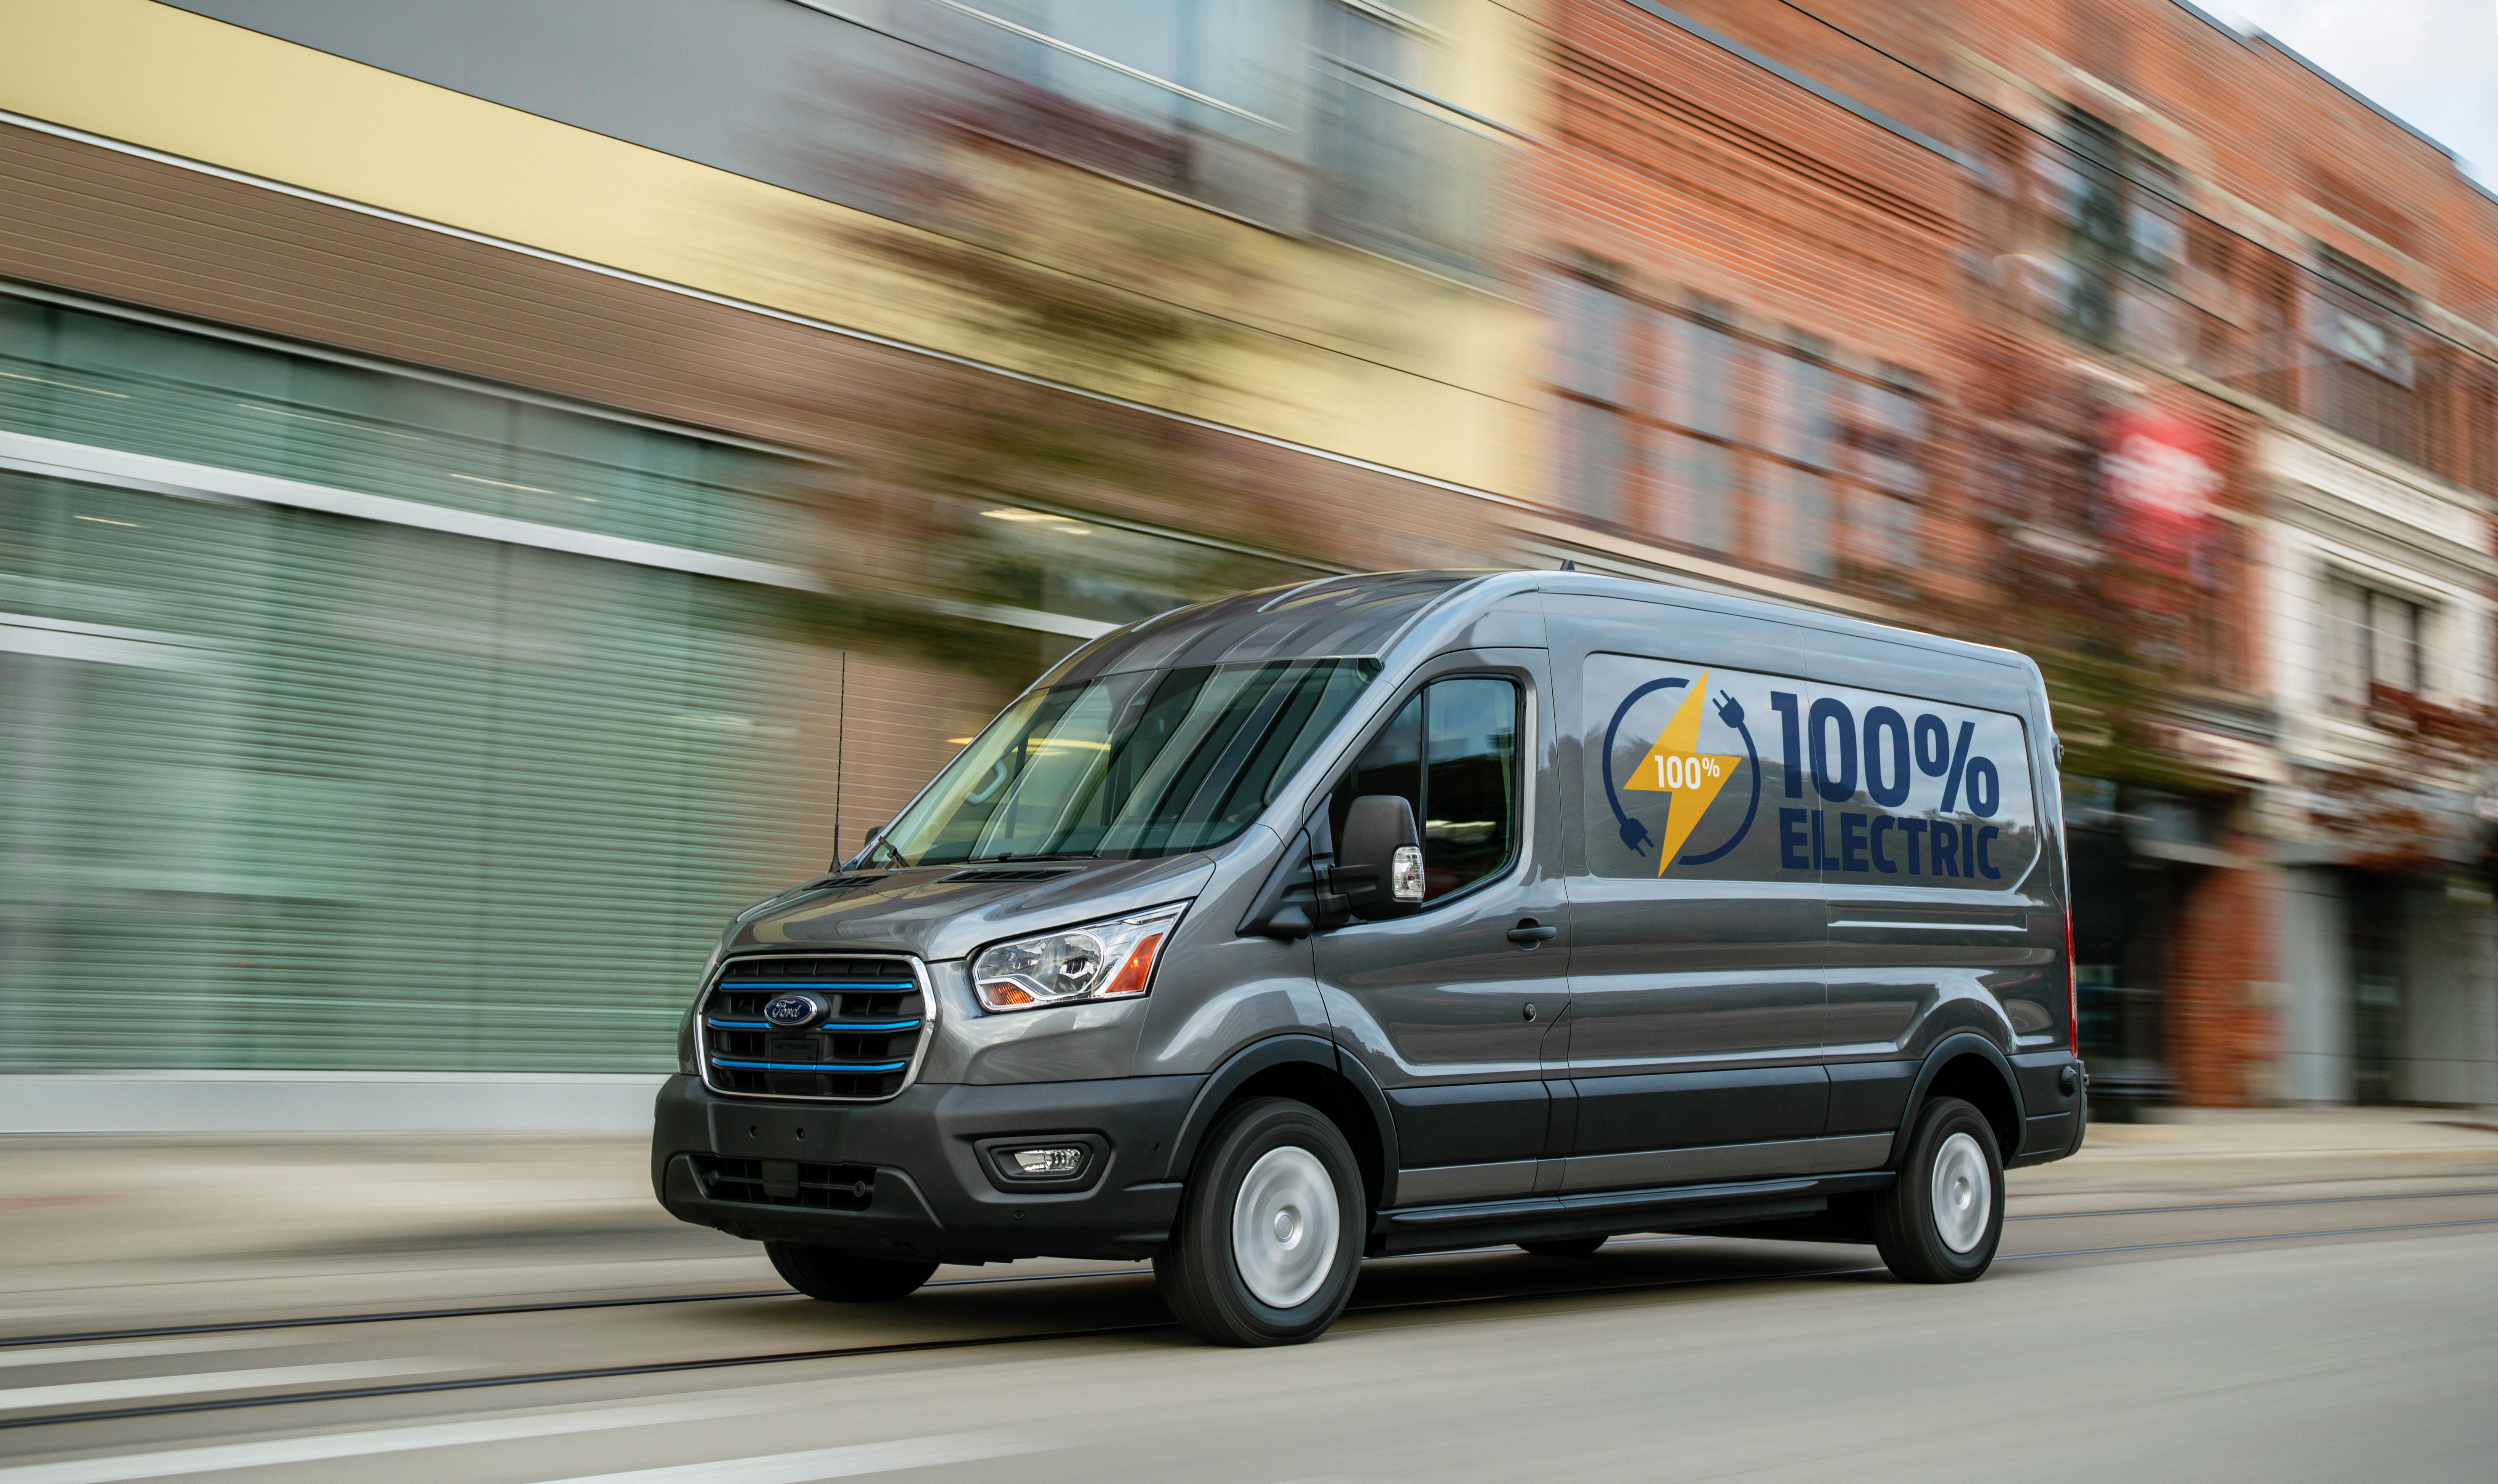 2022 Ford E-Transit: What We Know So Far